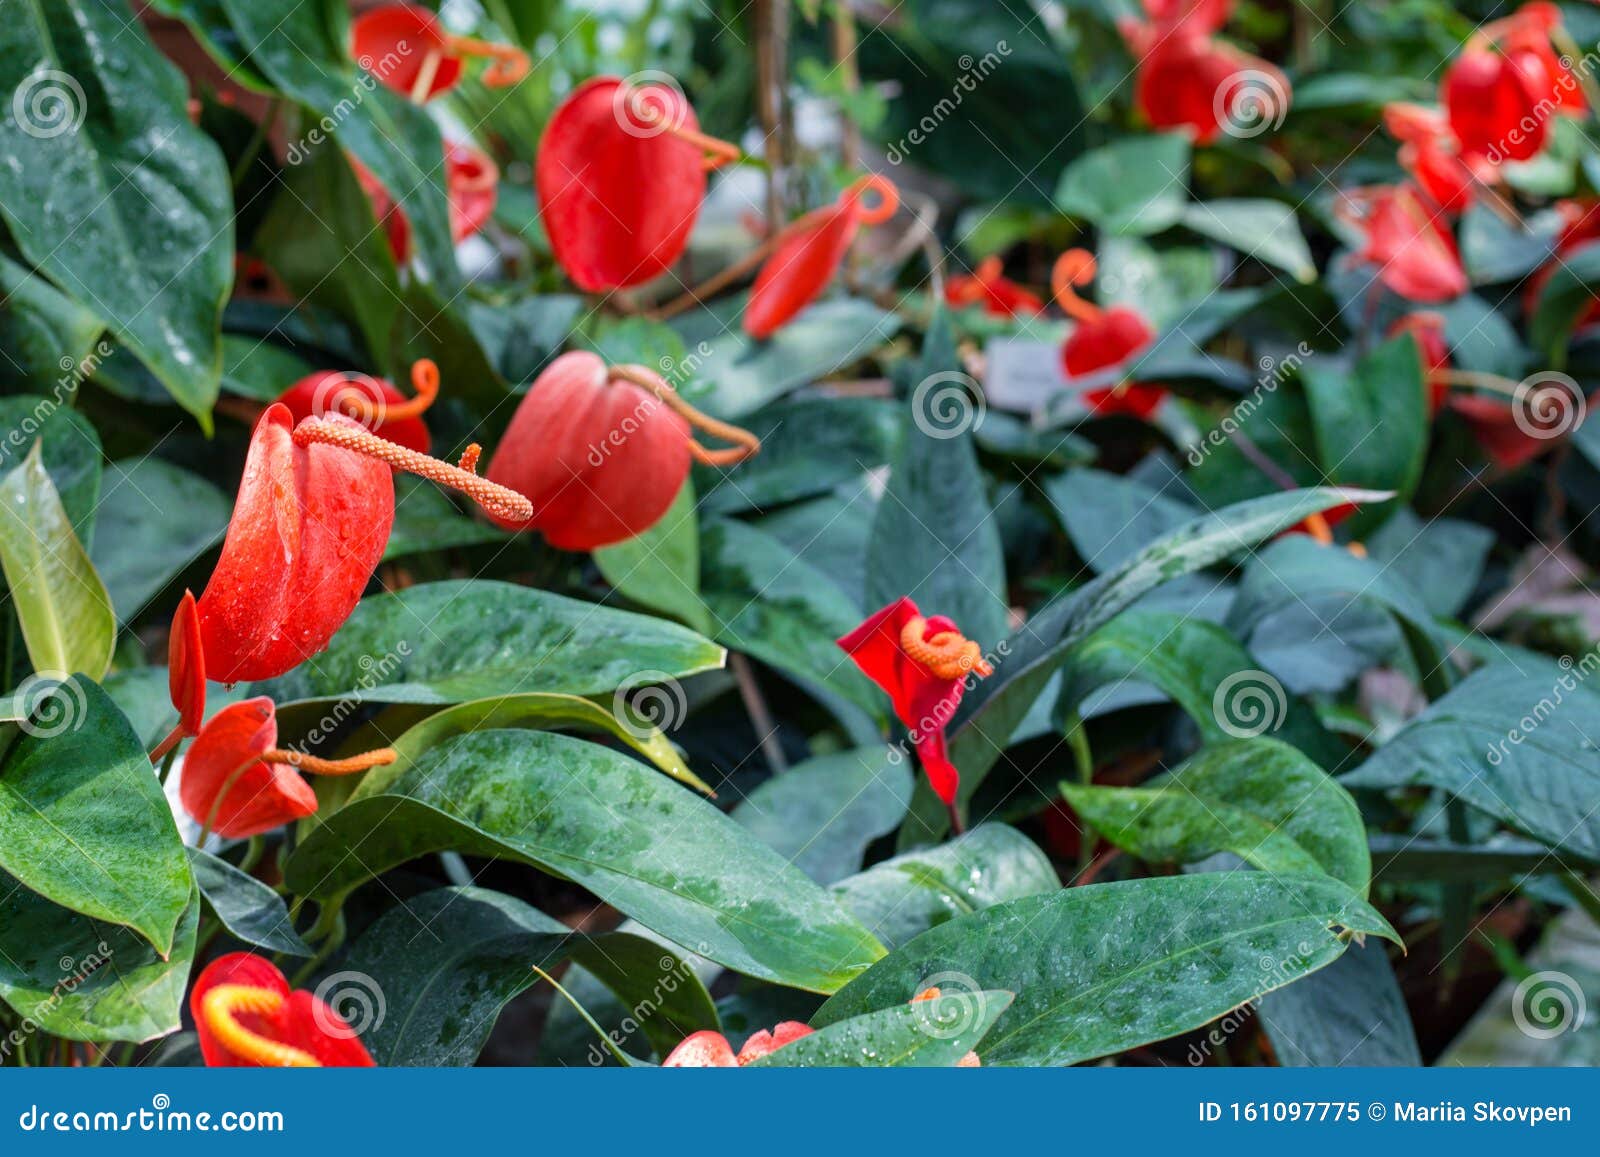 Field Of A Red Peace Lily After Rain Spathiphyllum Mauna Loa Stock Image Image Of Petal Calla 161097775